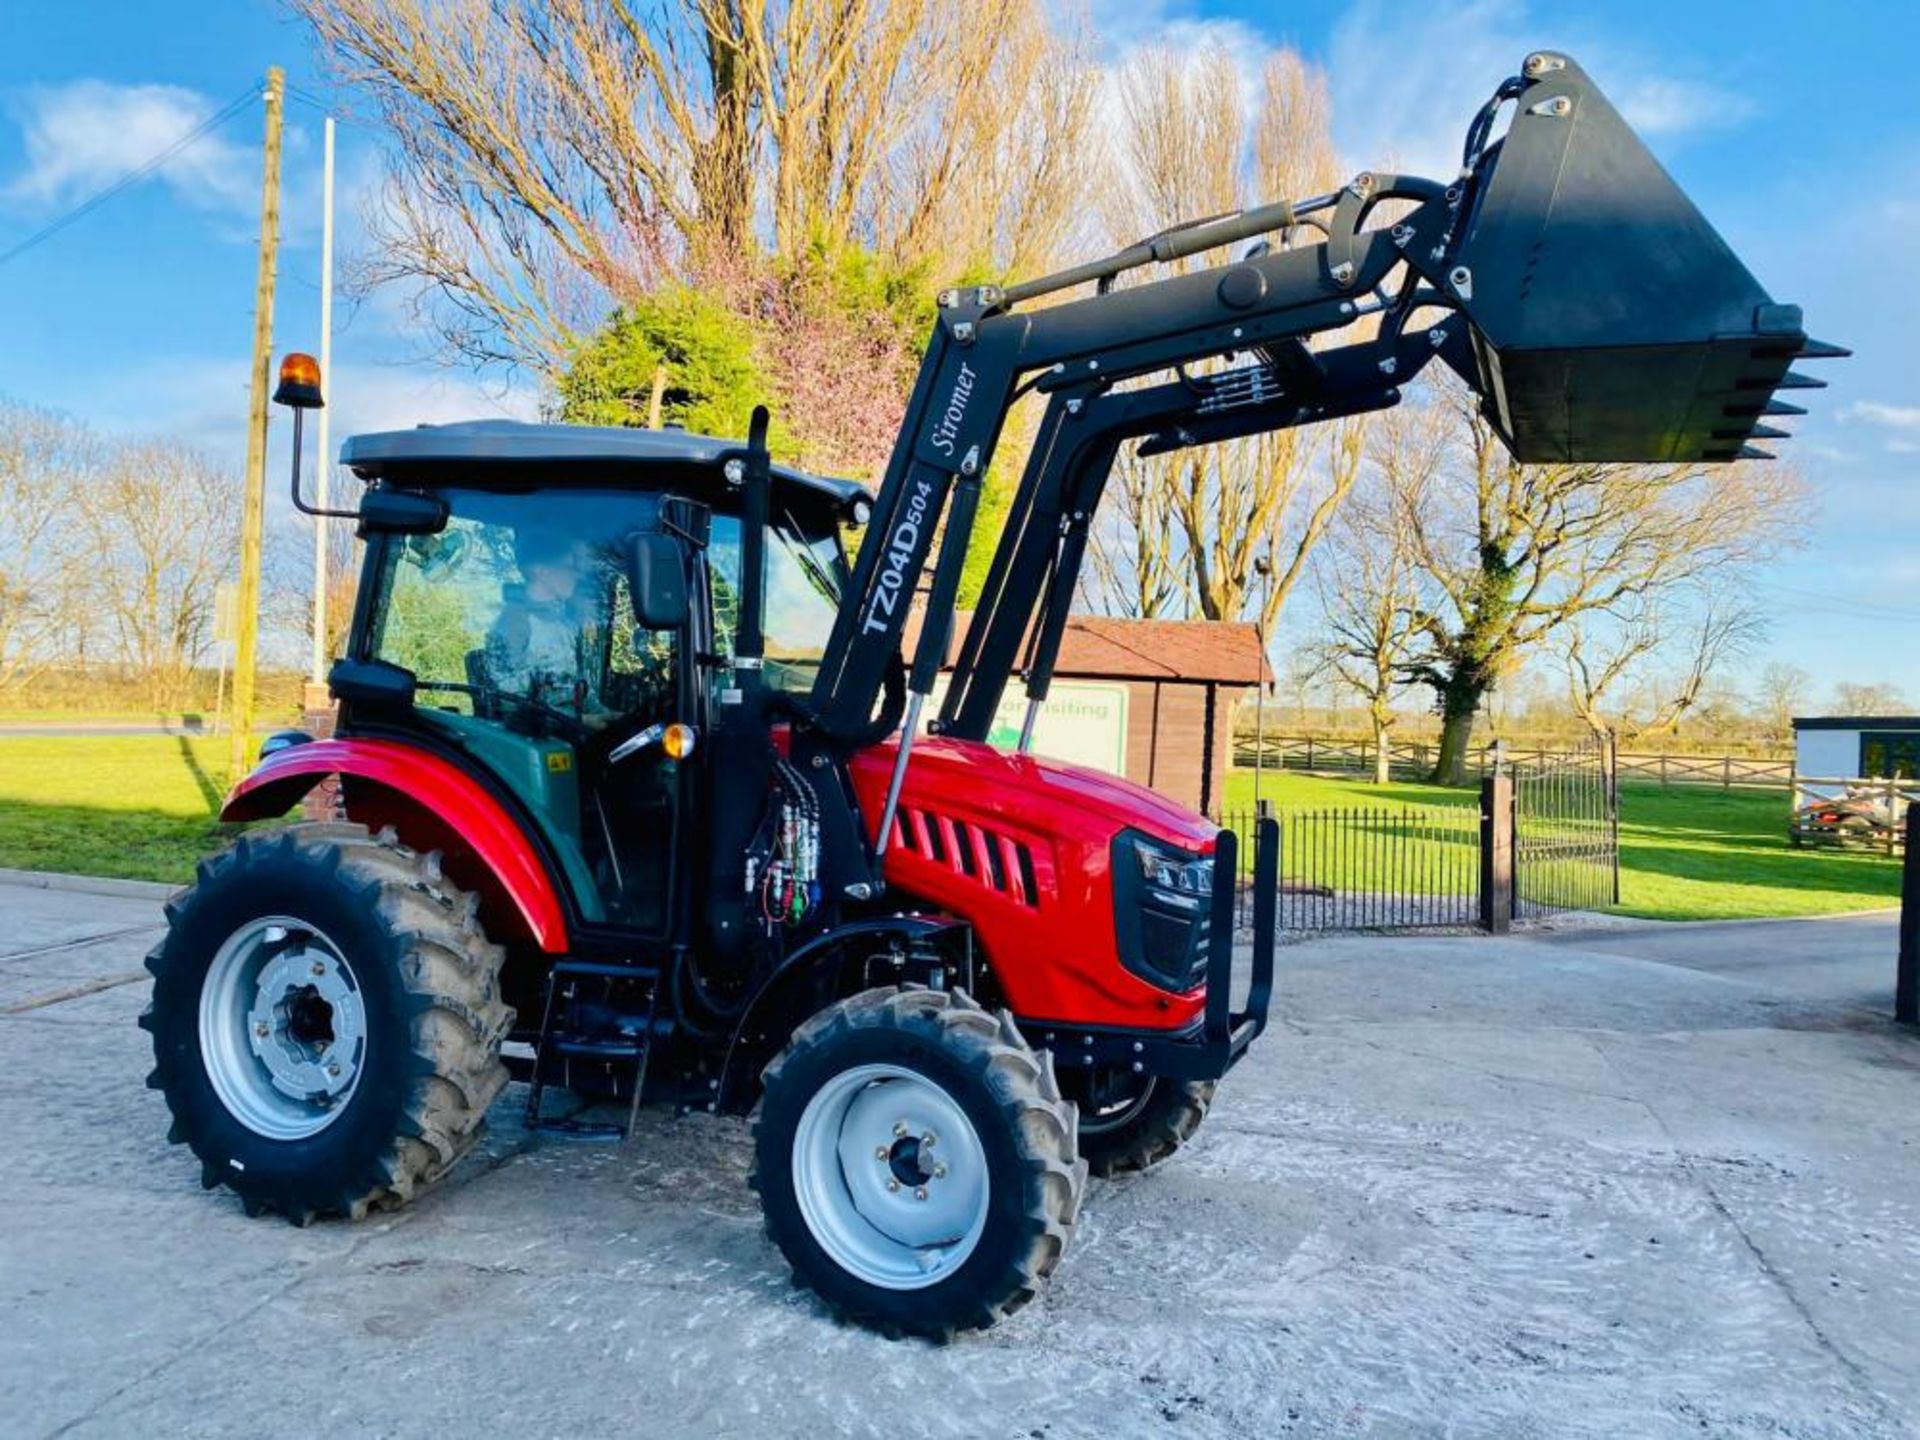 BRAND NEW SIROMER 504 4WD TRACTOR WITH SYNCHRO CAB AND LOADER - Bild 2 aus 18